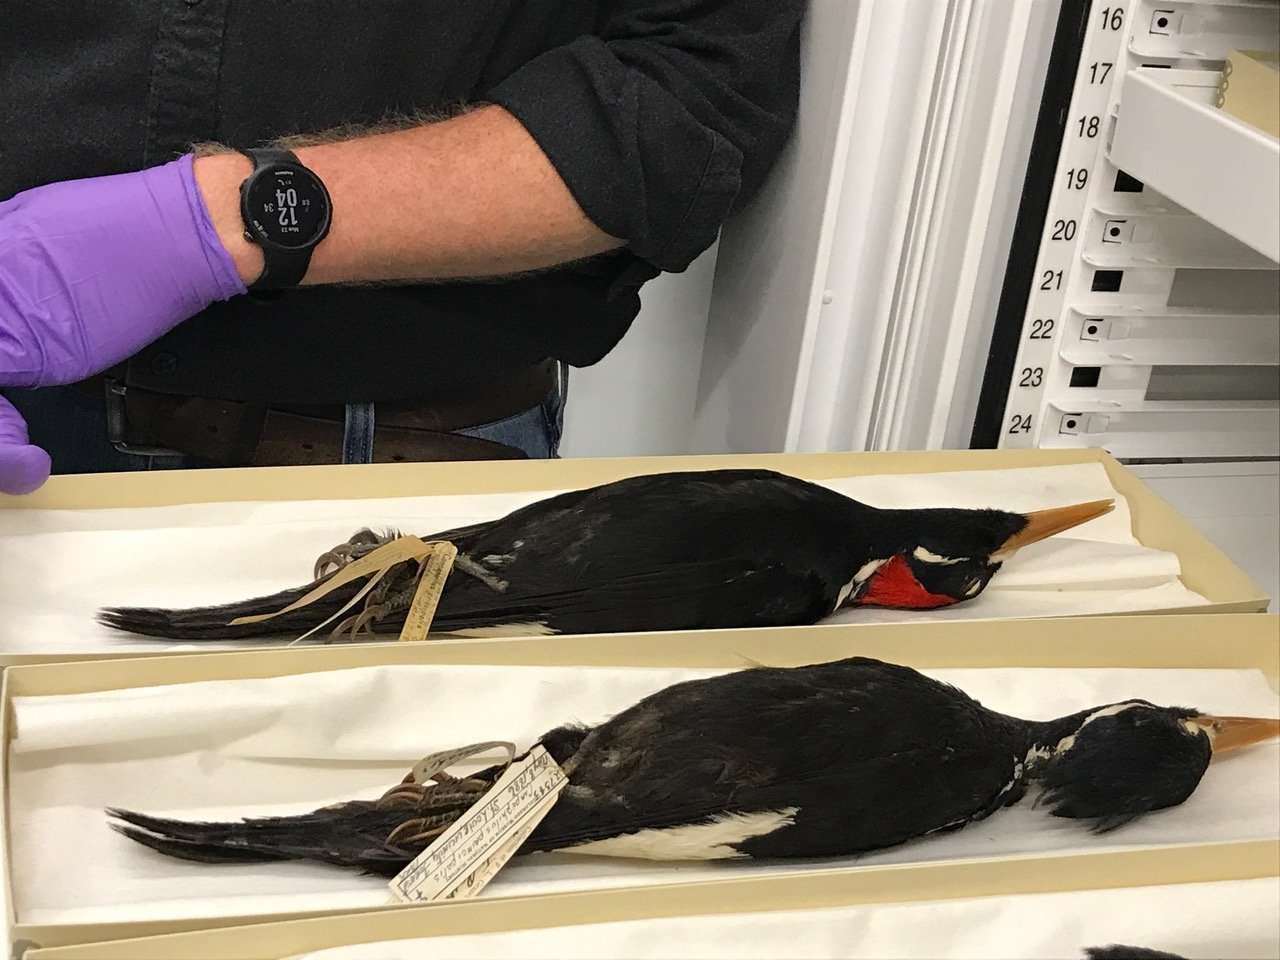  Ivory-billed woodpecker specimens. Photo by Carron Meaney.  